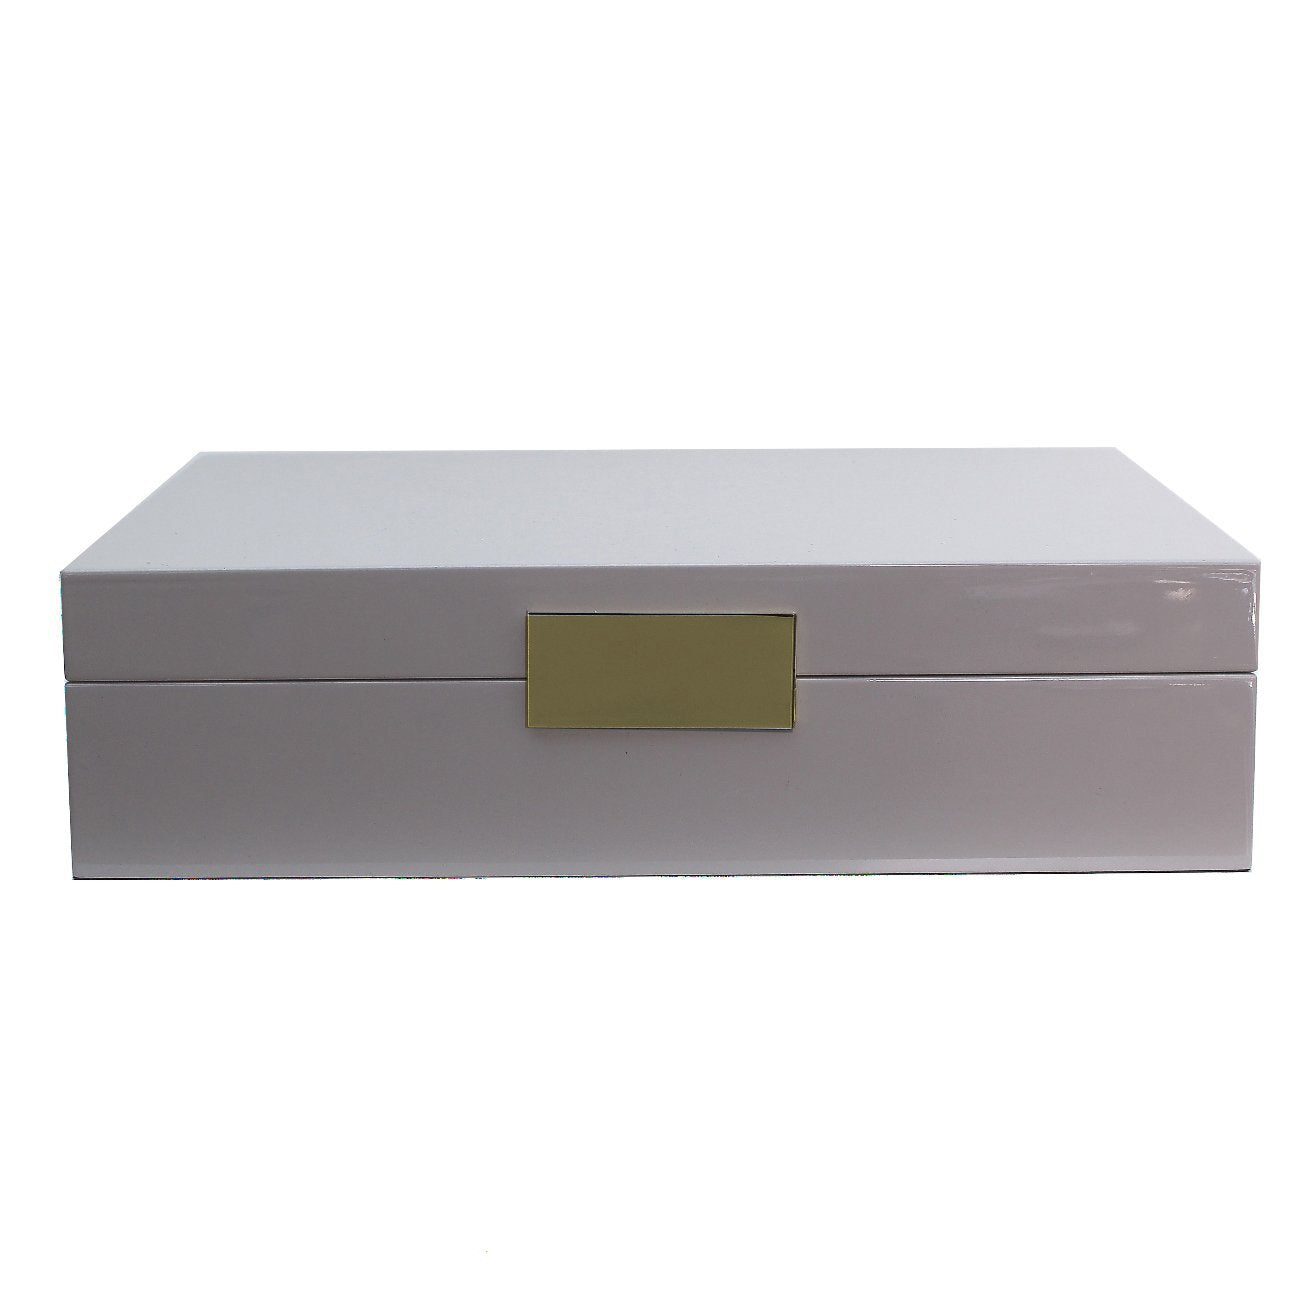 Large chiffon gray glasses box with gold plated clasp